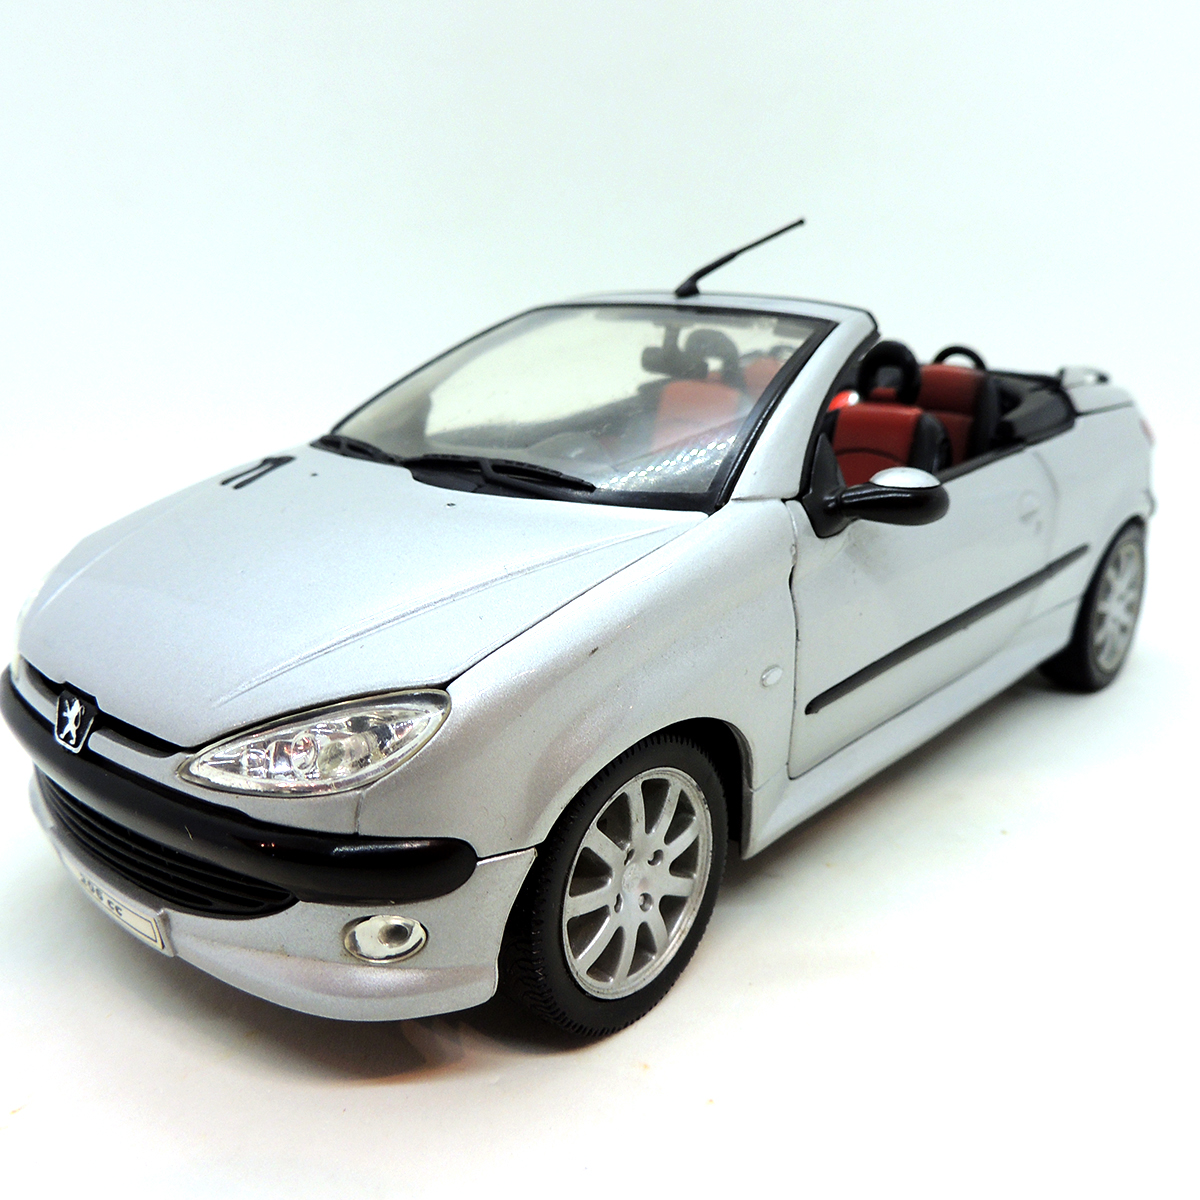 Peugeot 206cc Cabriolet Welly 1/18 Metal Diecast - Madtoyz